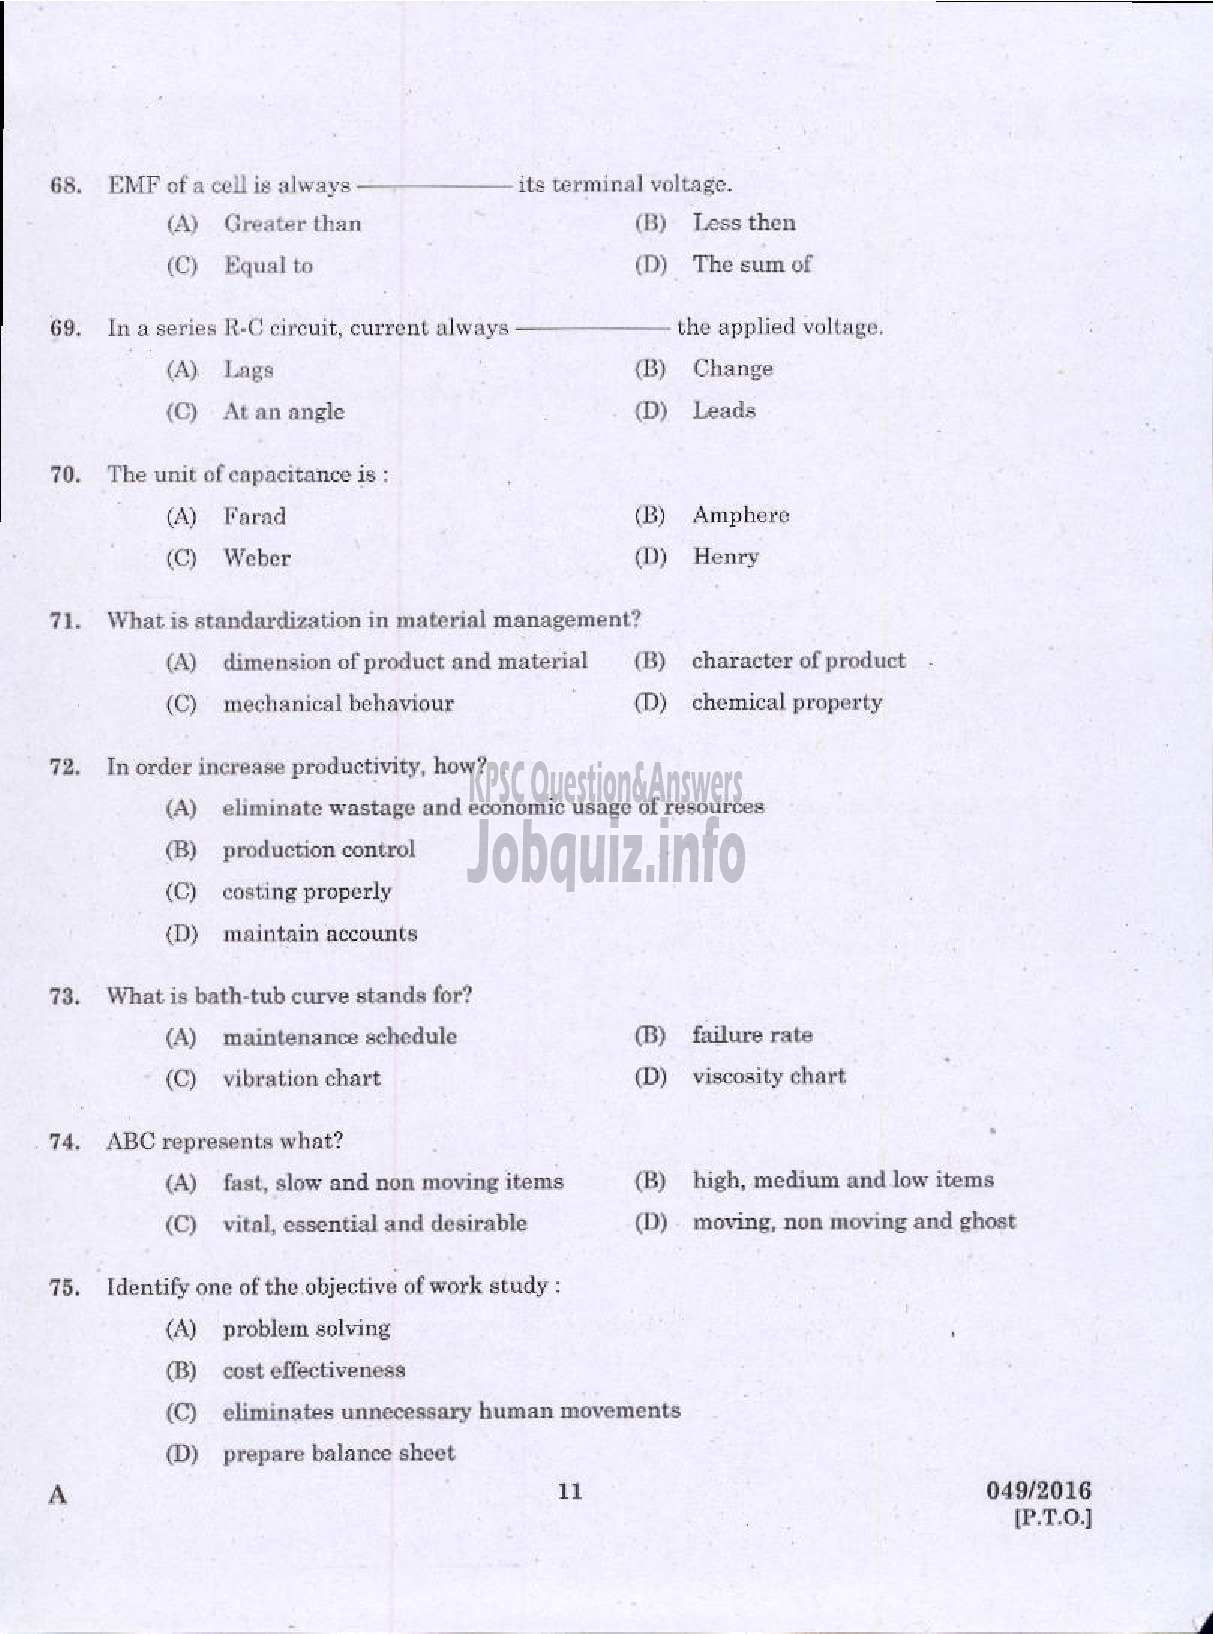 Kerala PSC Question Paper - WORKS MANAGER STATE WATER TRANSPORT-9